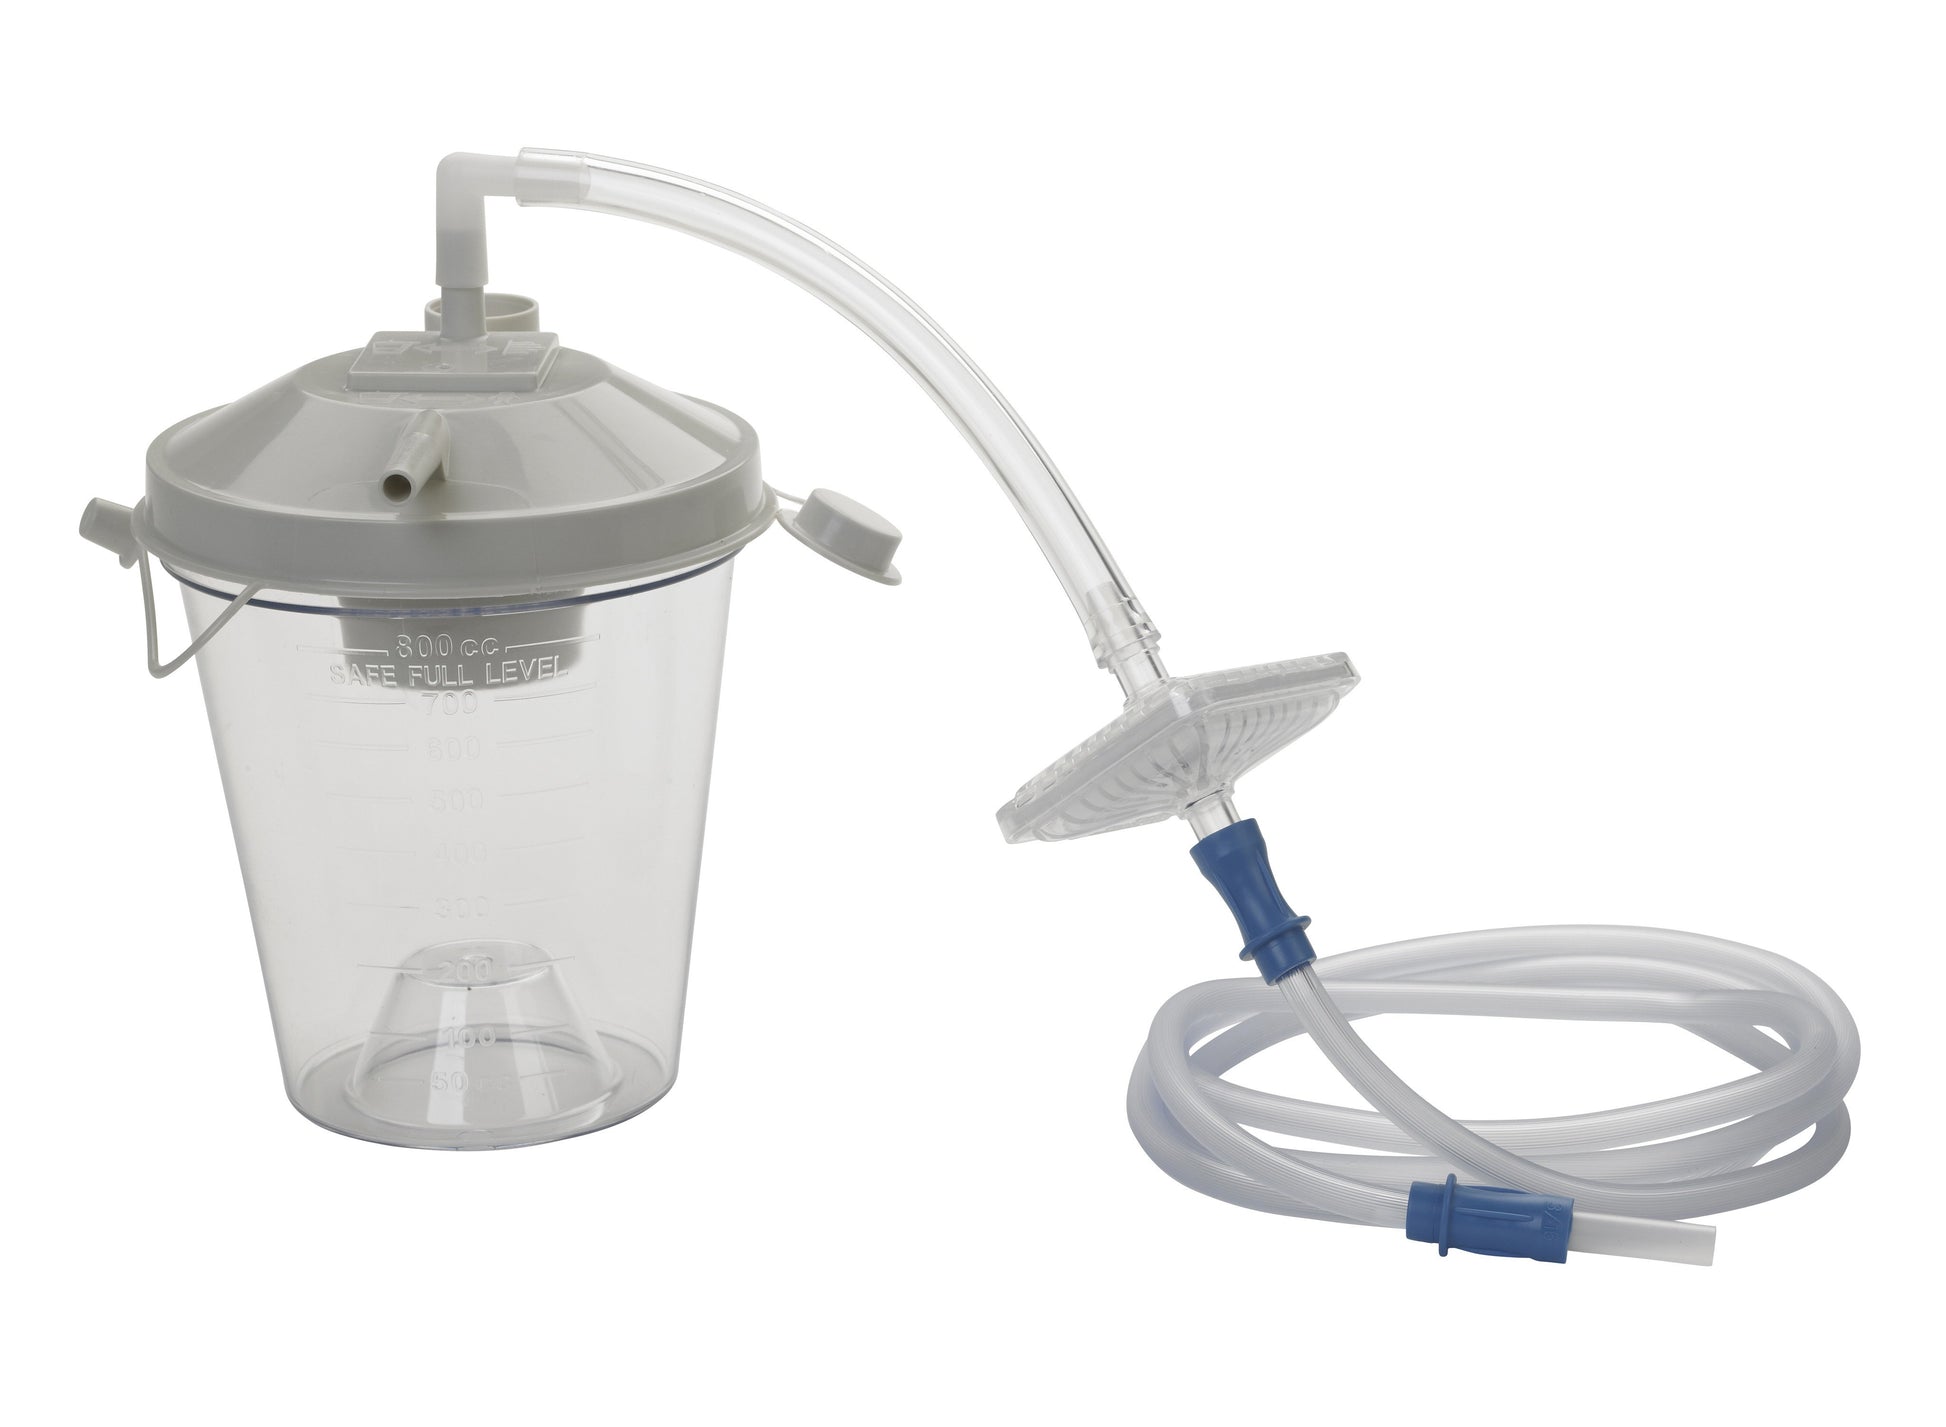 Universal Suction Machine Tubing and Filter Replacement Kit